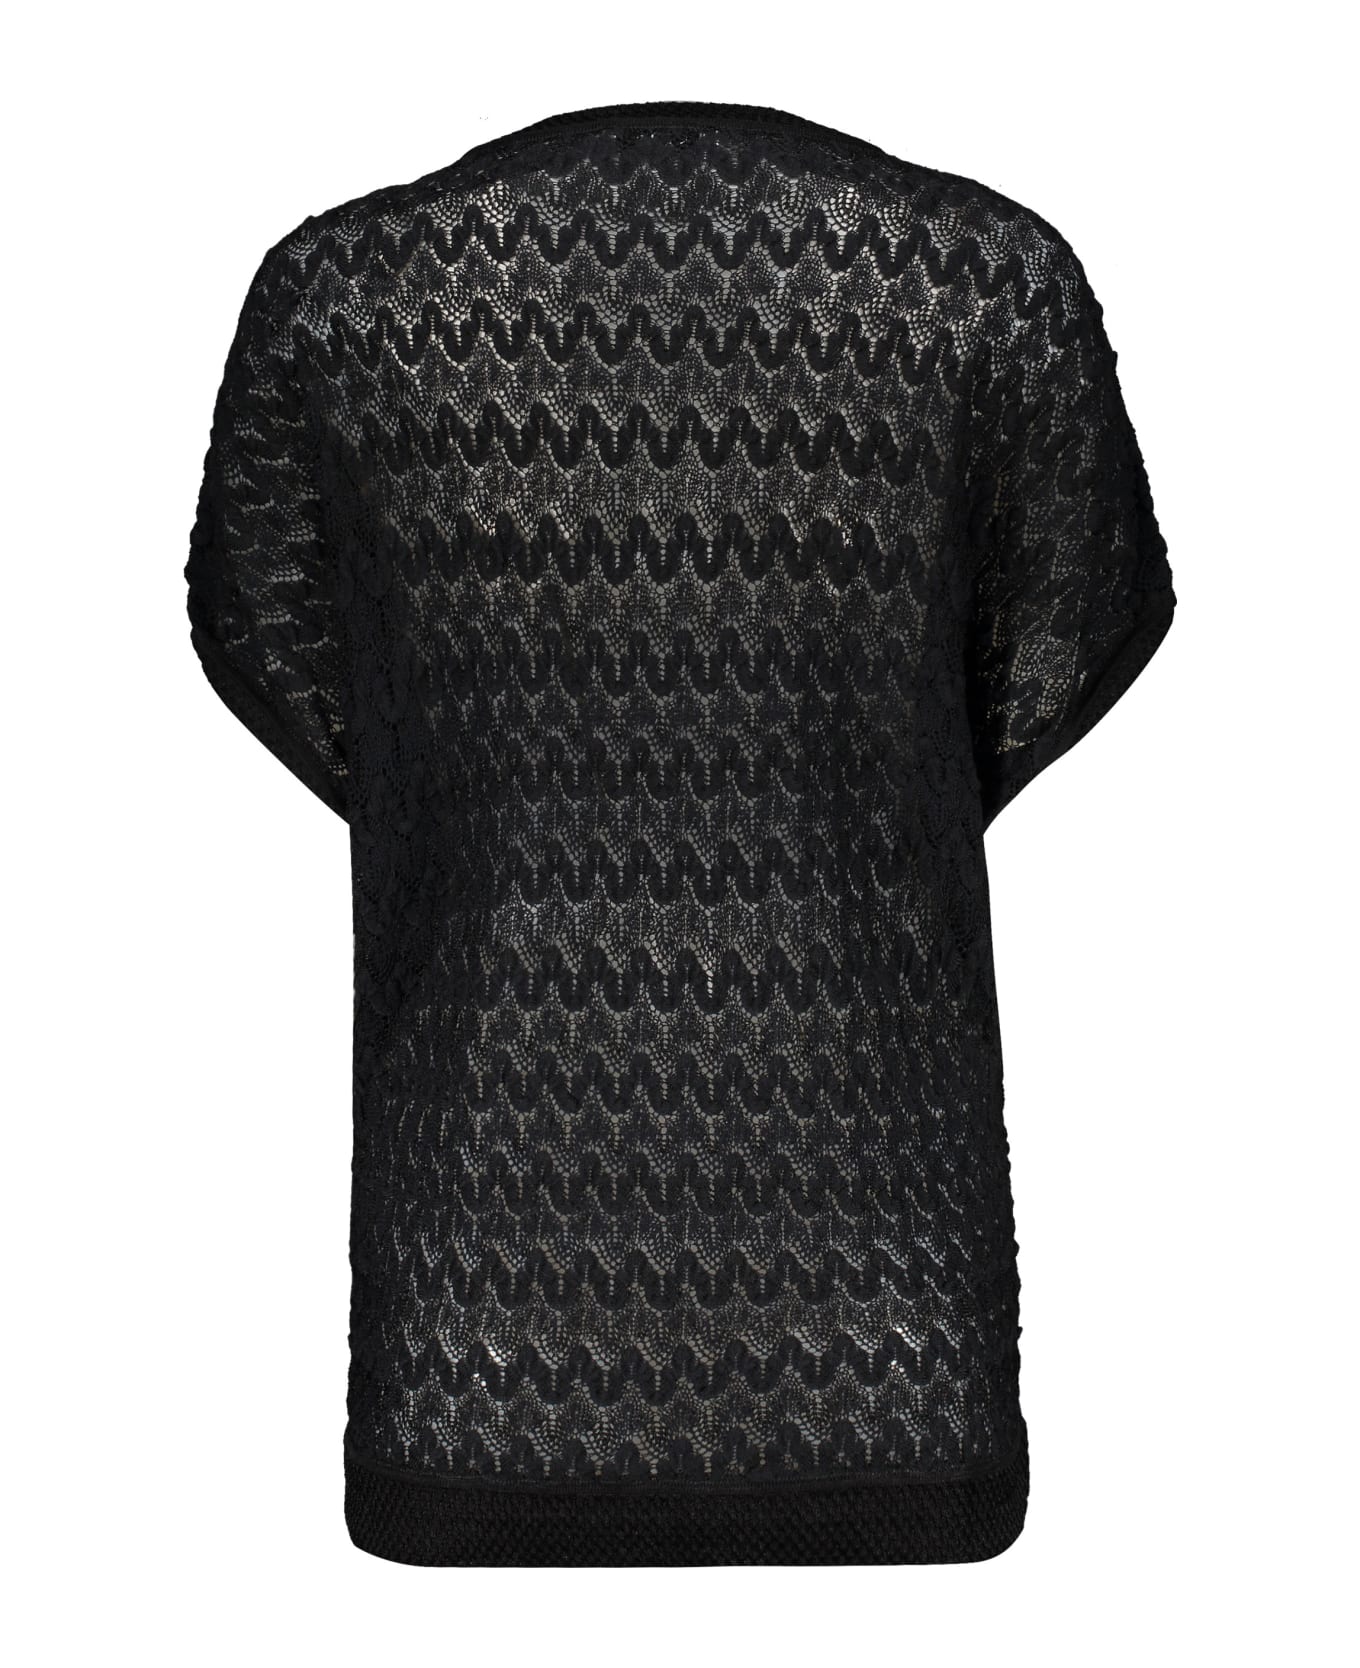 M Missoni Knitted Top - black